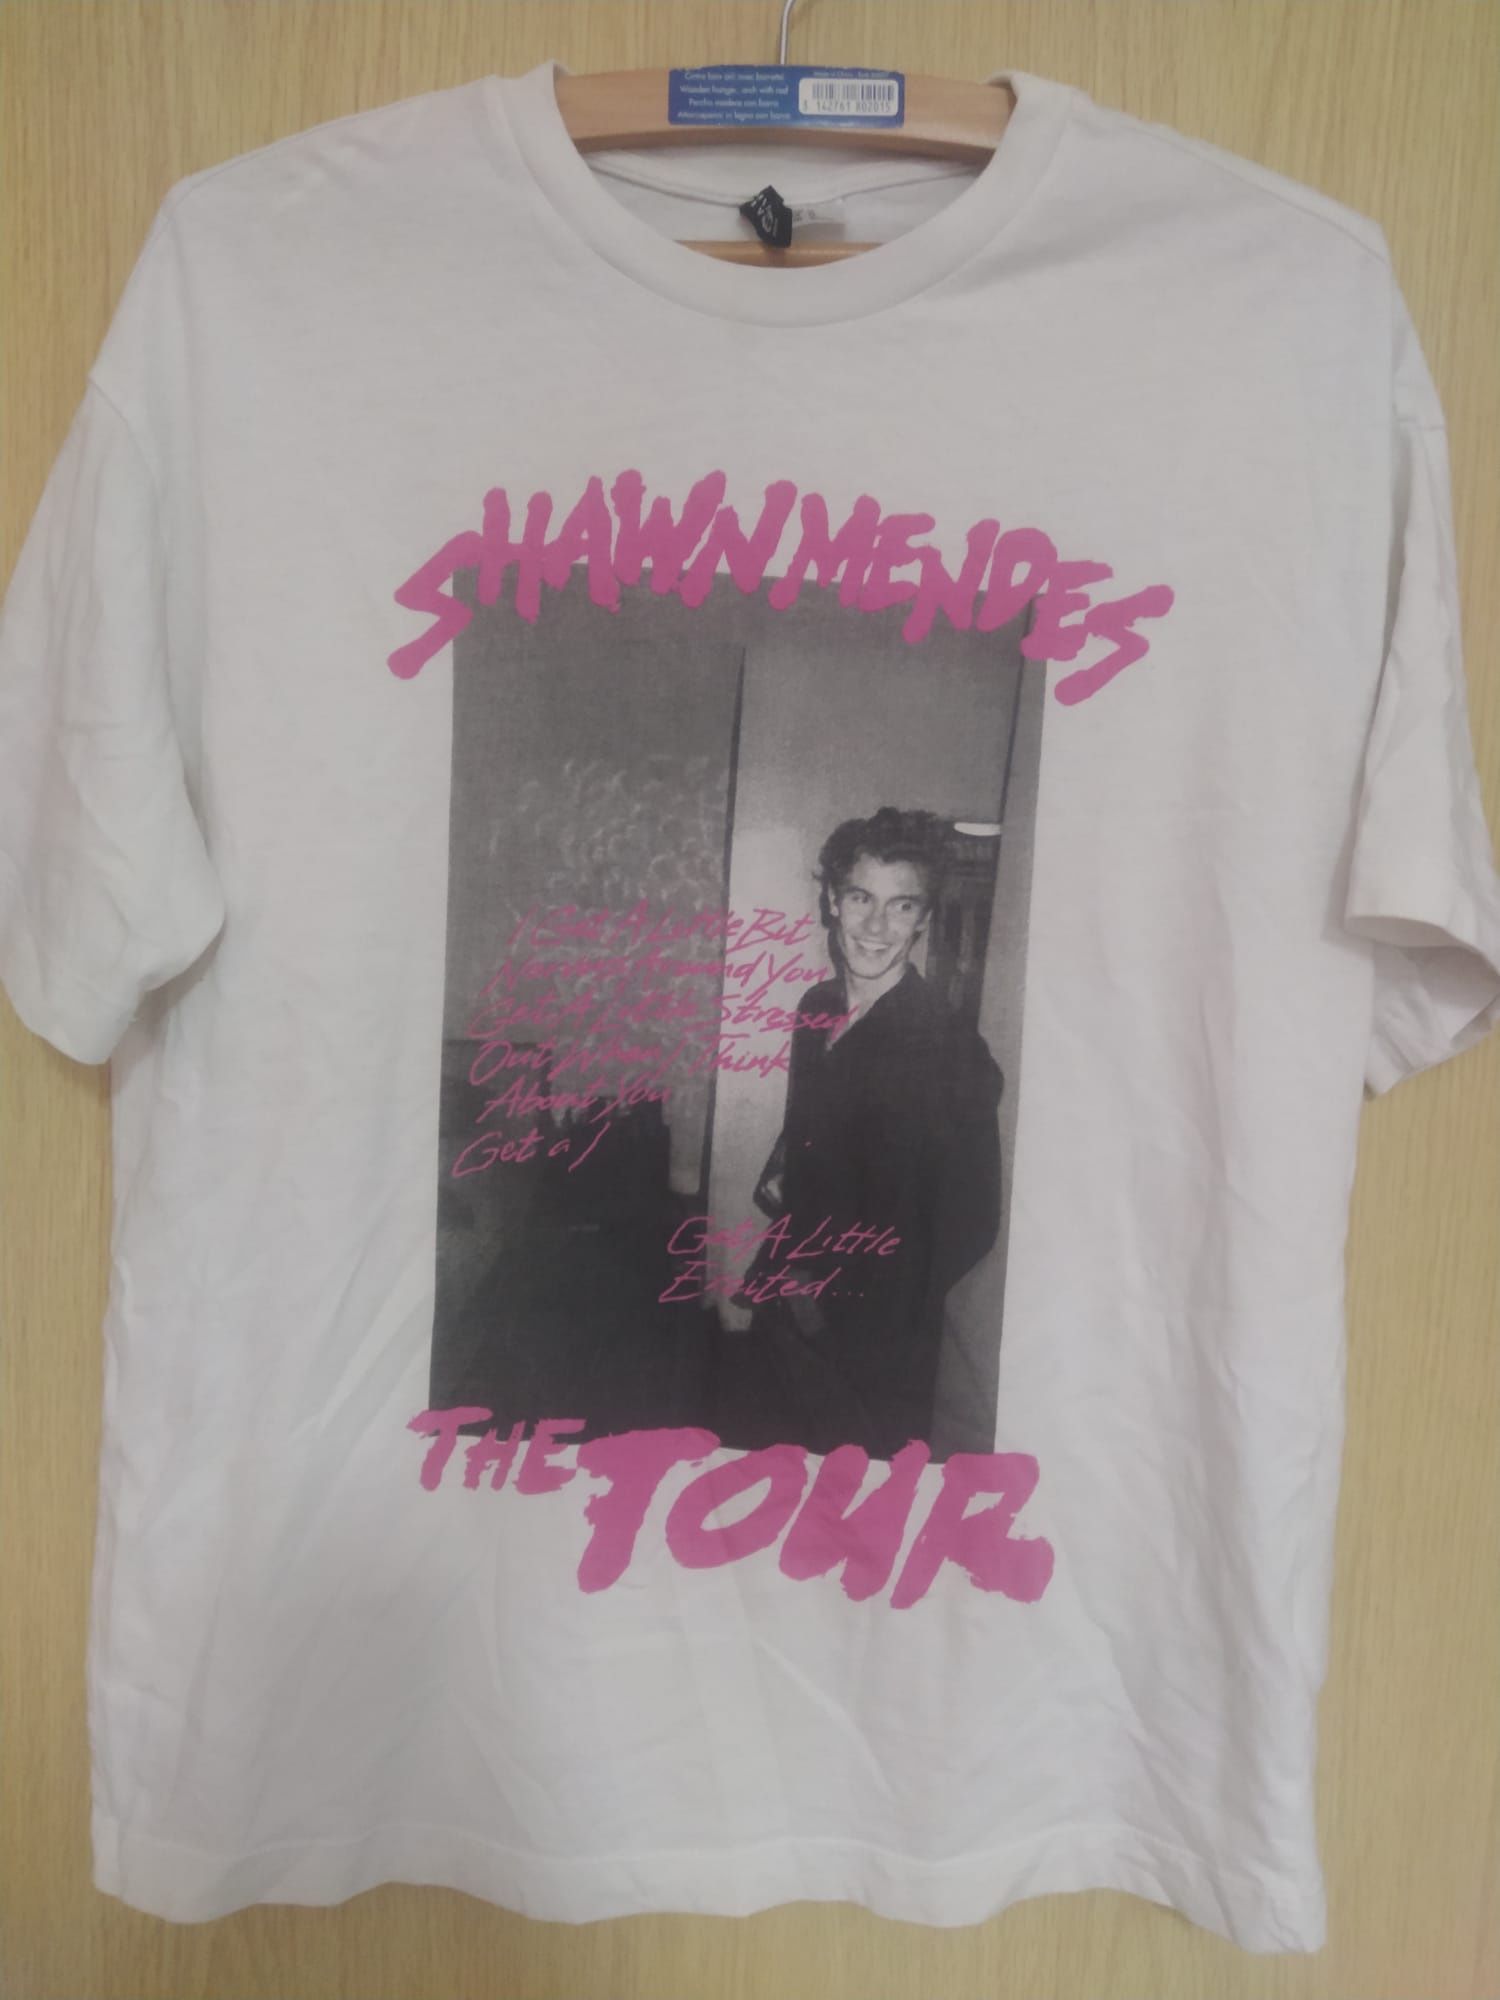 T-shirt oficial do Shawn Mendes